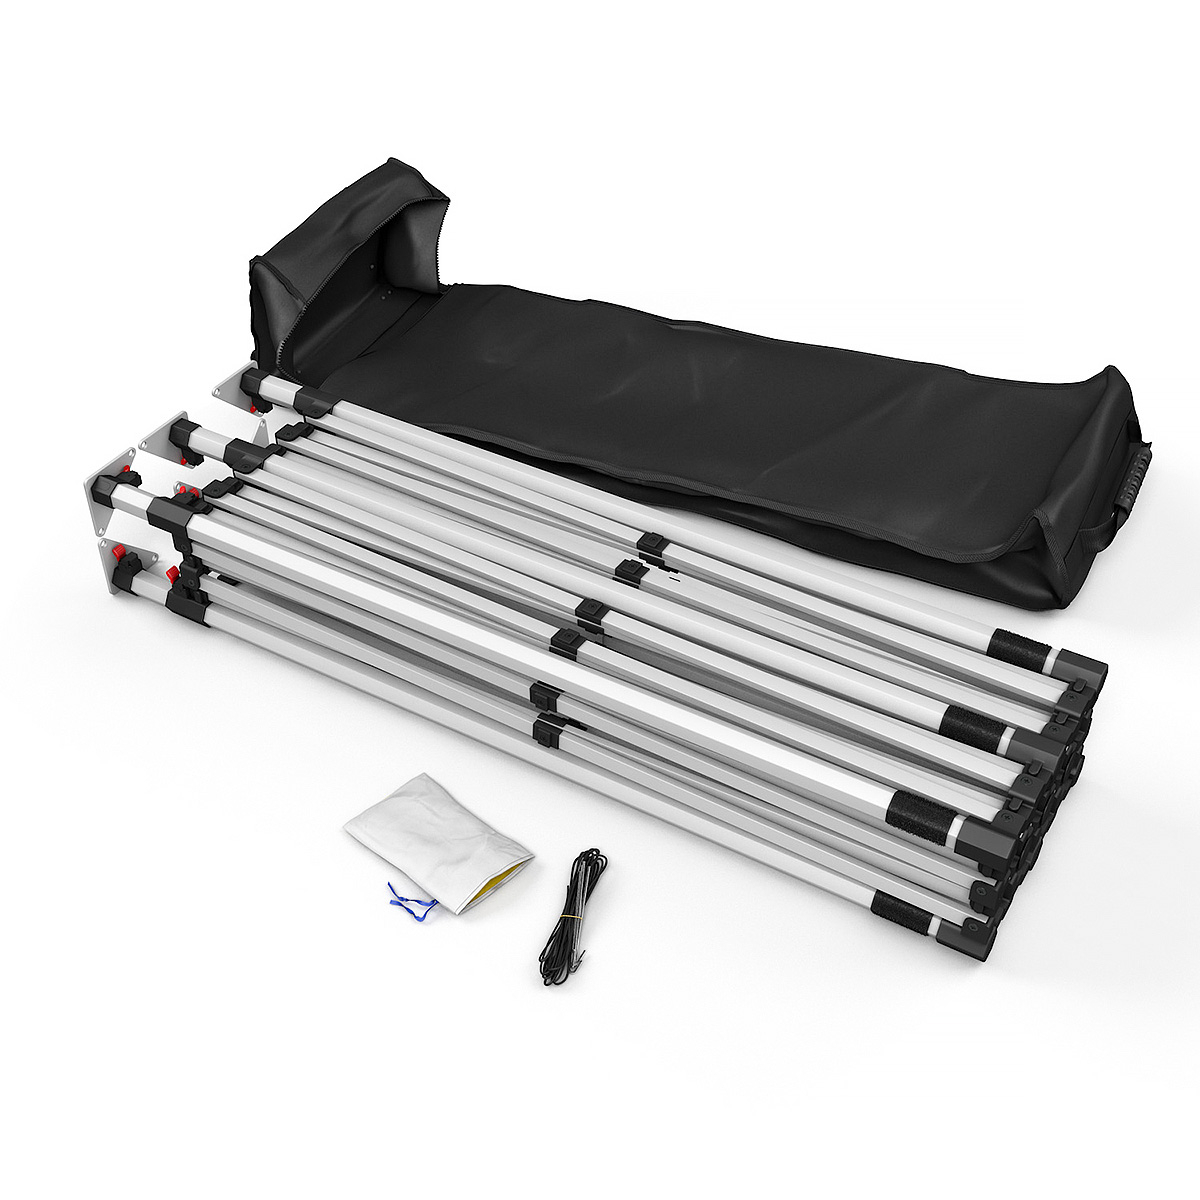 RHINO® 3m x 6m Aluminium Frame Is Complete With Anchoring Set And Wheeled Transport Bag